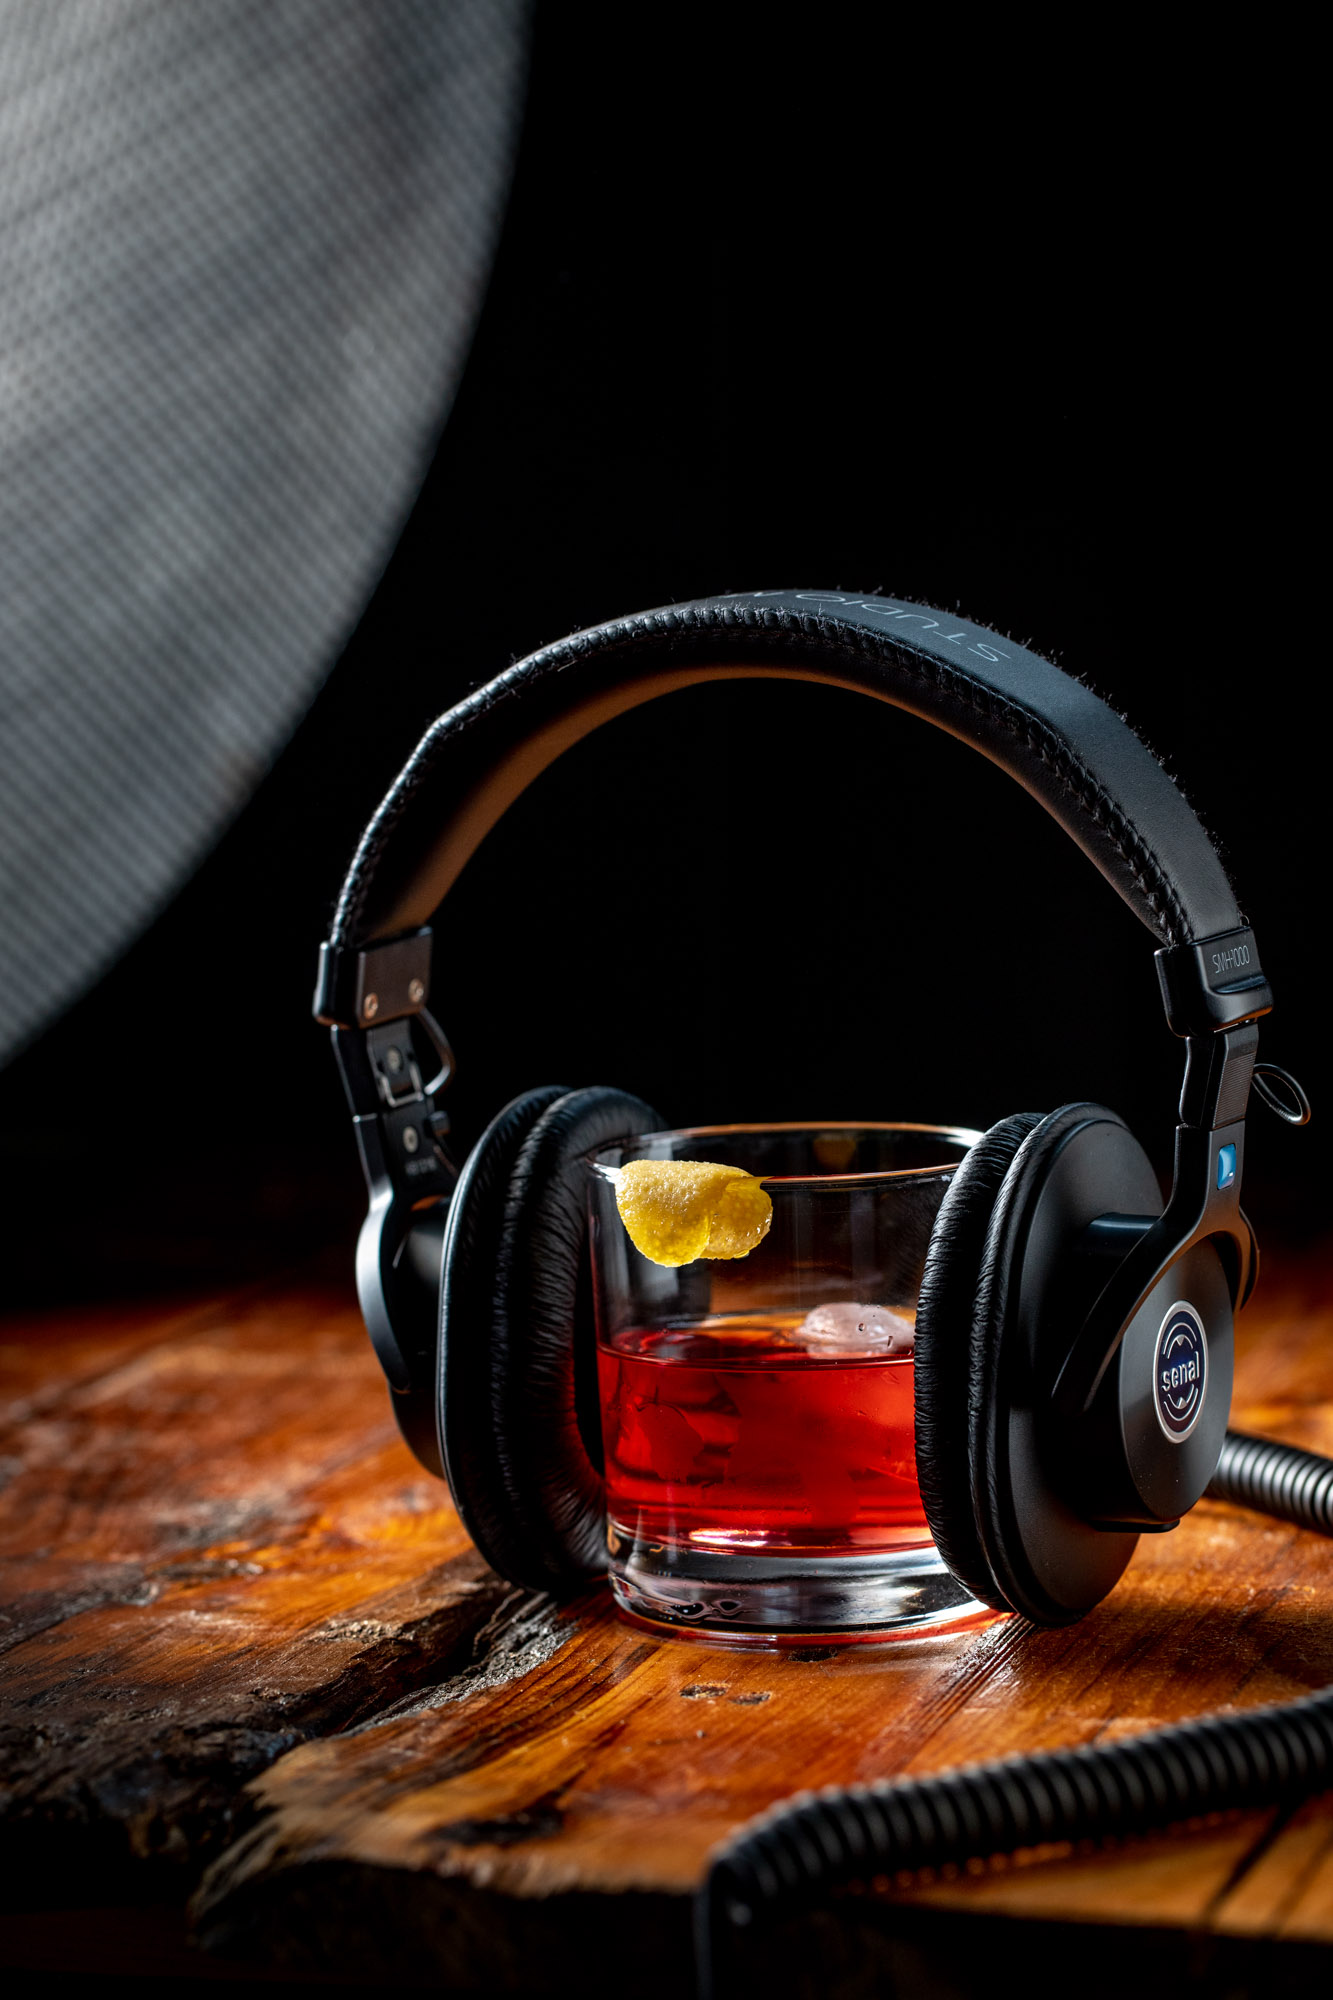 A cocktail with a pair of headphones listening to music